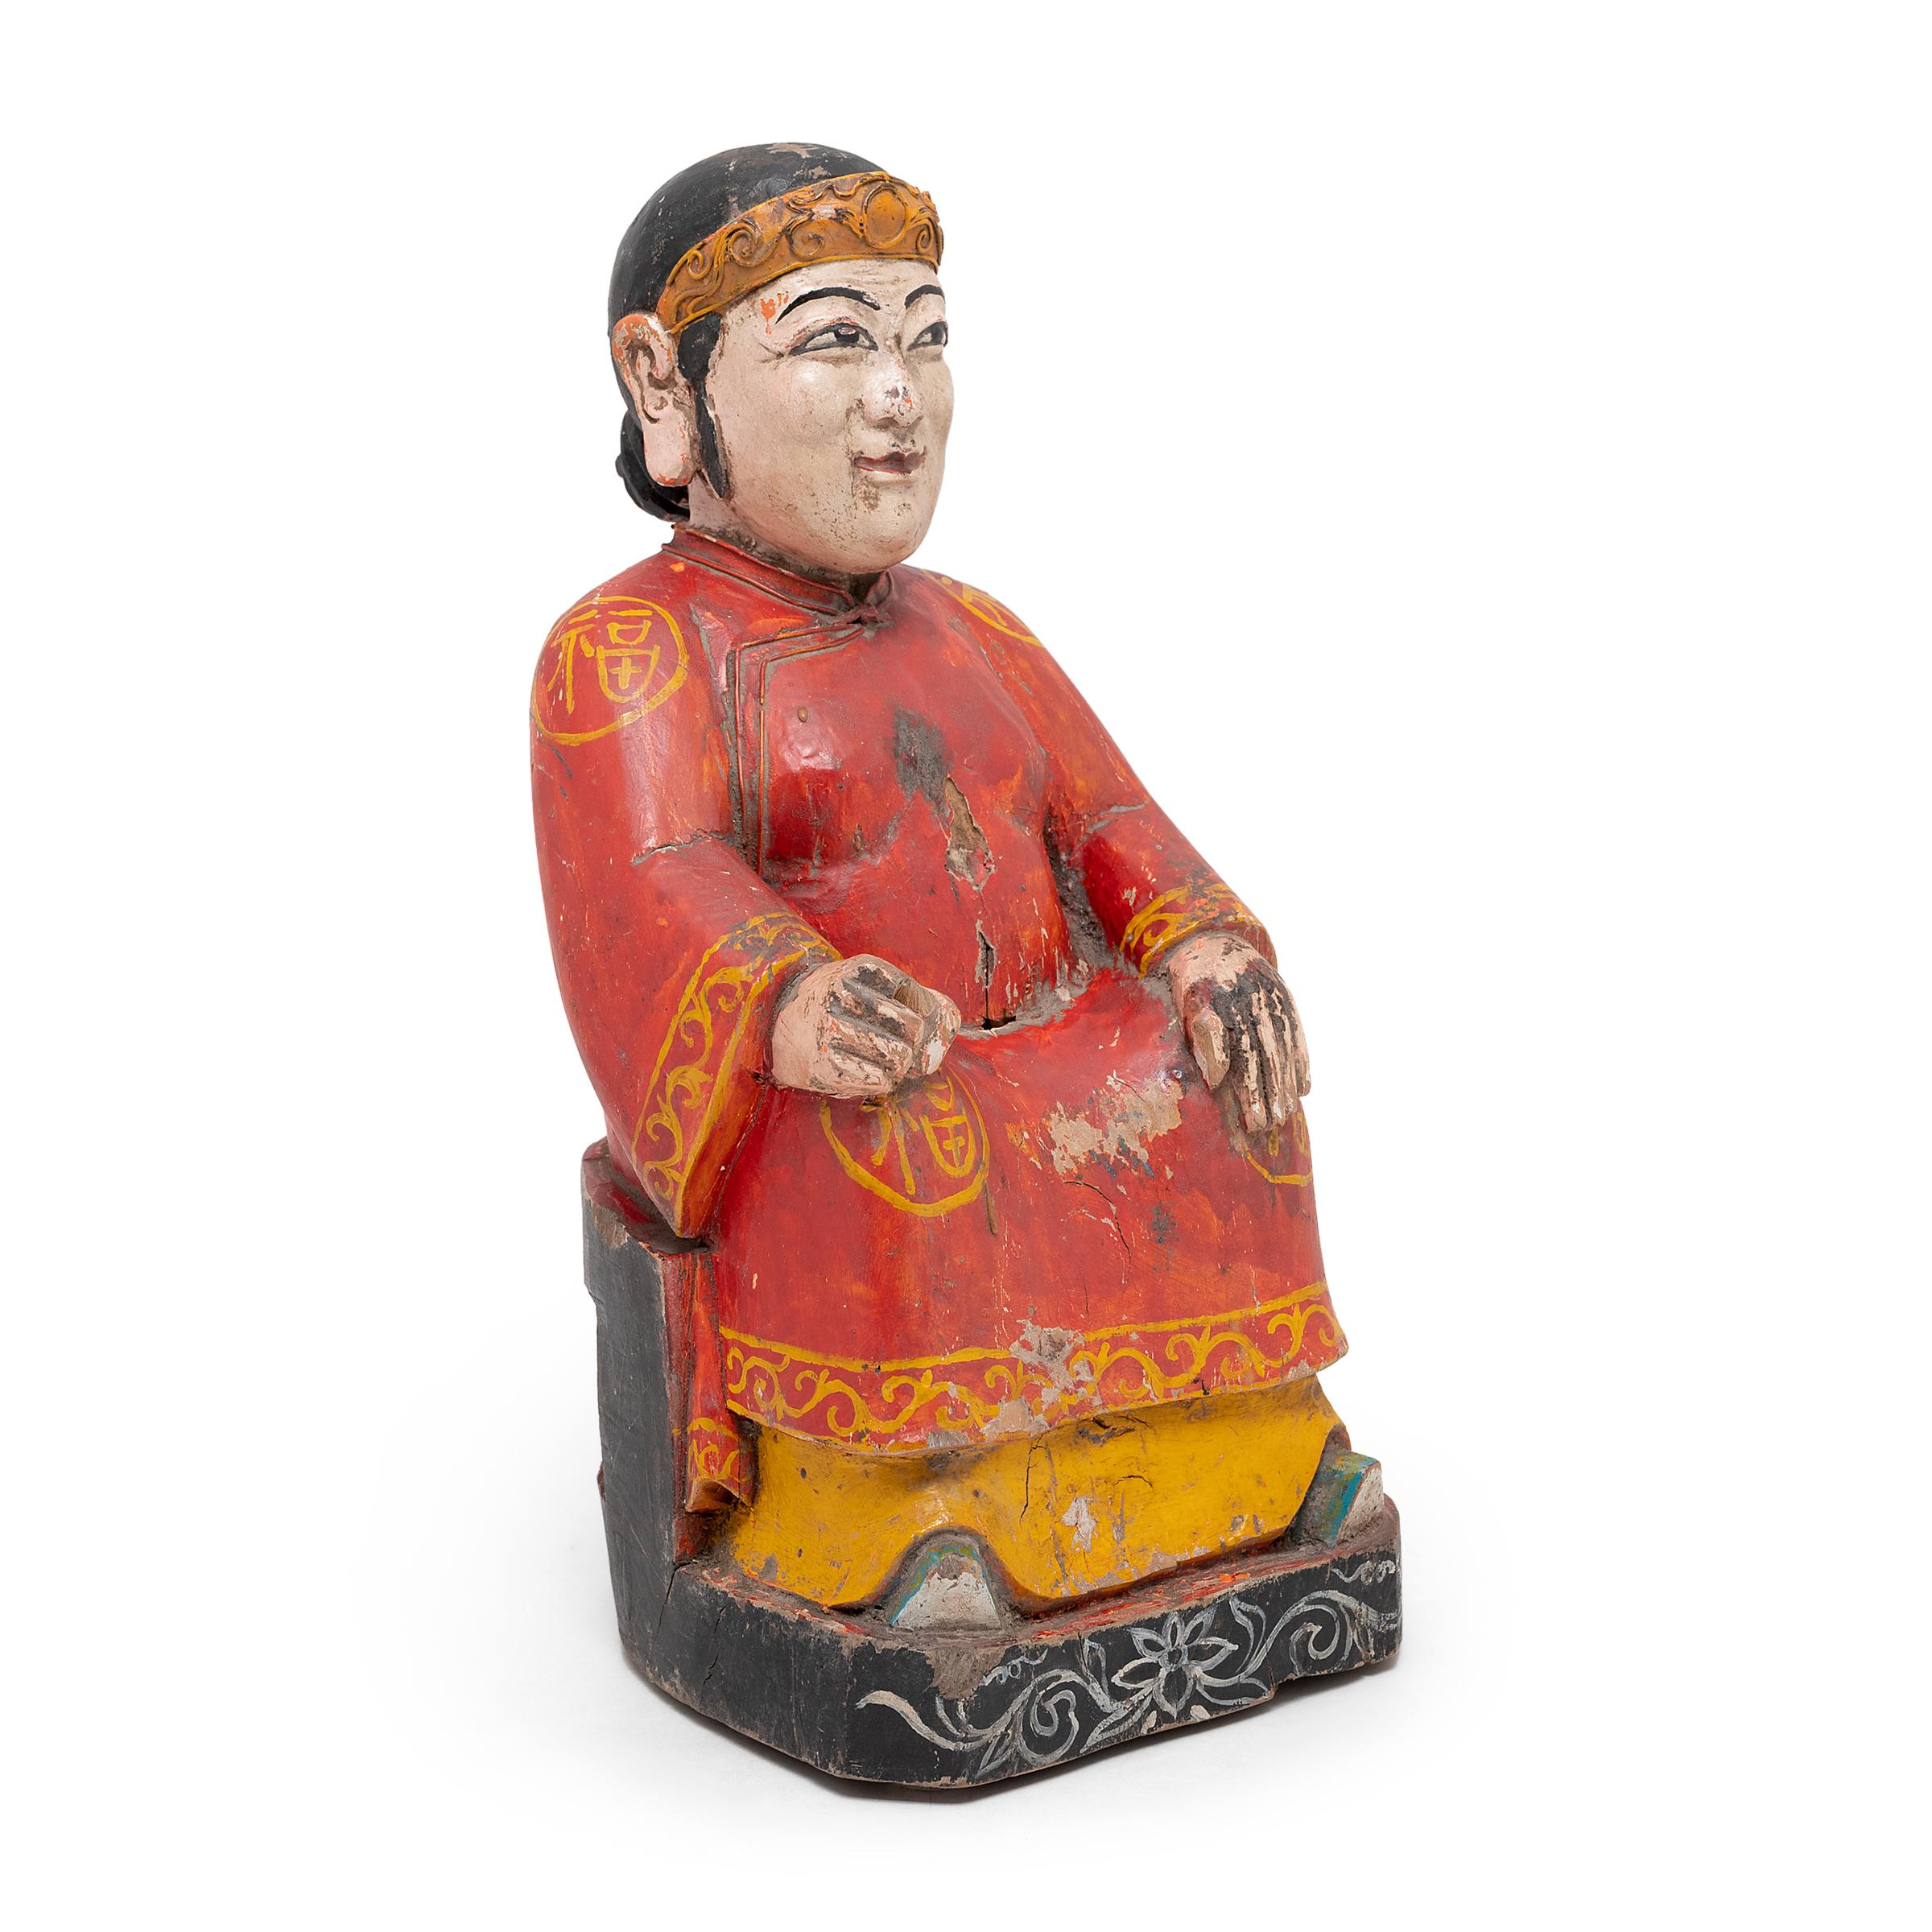 An integral part of traditional Chinese home life, ancestor worship before a domestic altar often featured painted ancestral portraits or tabletop ancestor figures. This late 19th-century seated ancestor figure was carefully hand-carved and painted